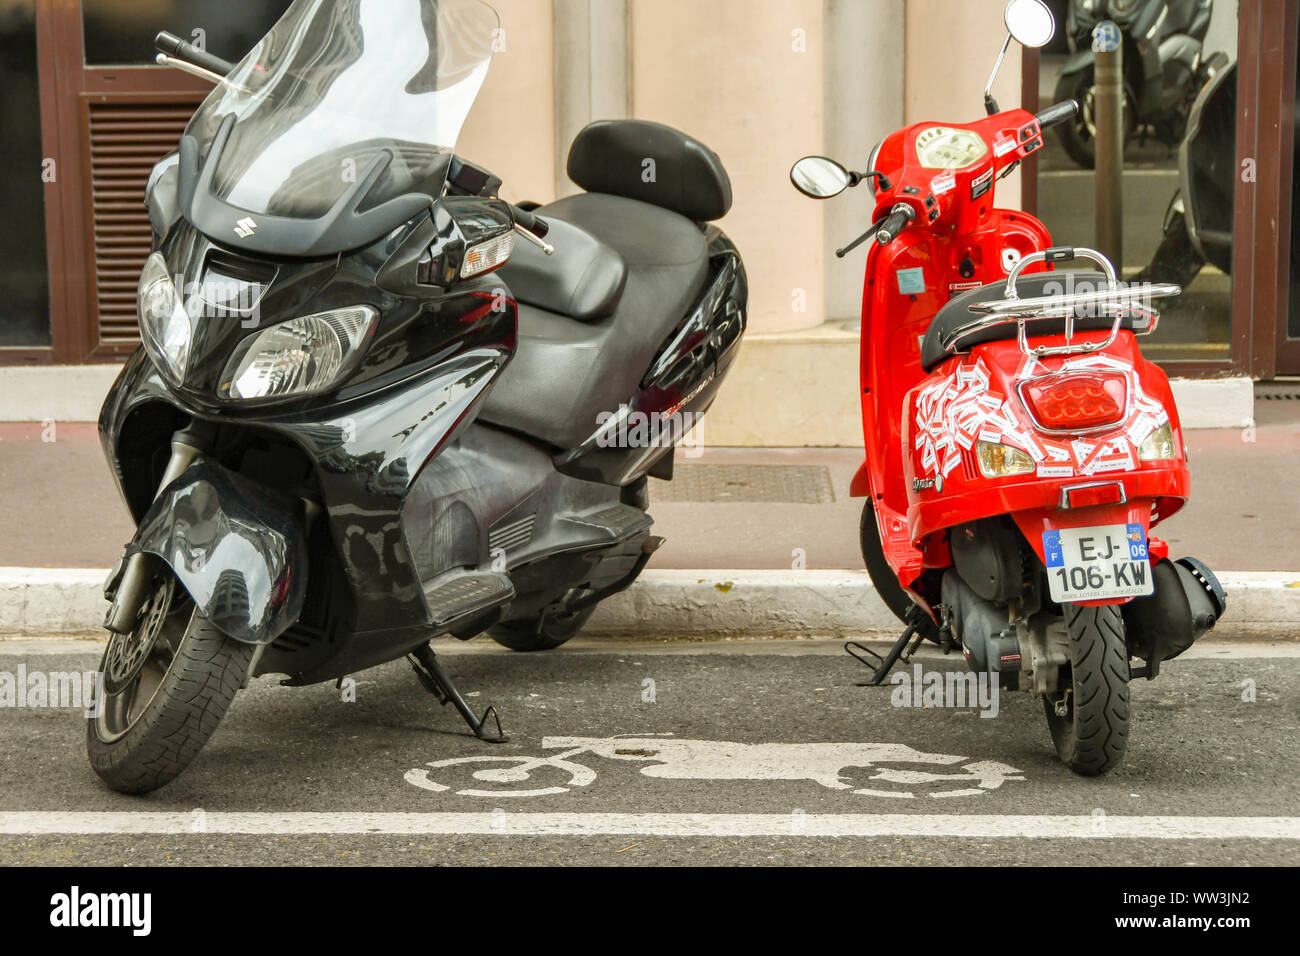 SAN RAPHAEL, FRANCE - APRIL 2019: Motorbike and motor scooter parked in a designated parking bay on a street in San Raphael. Stock Photo